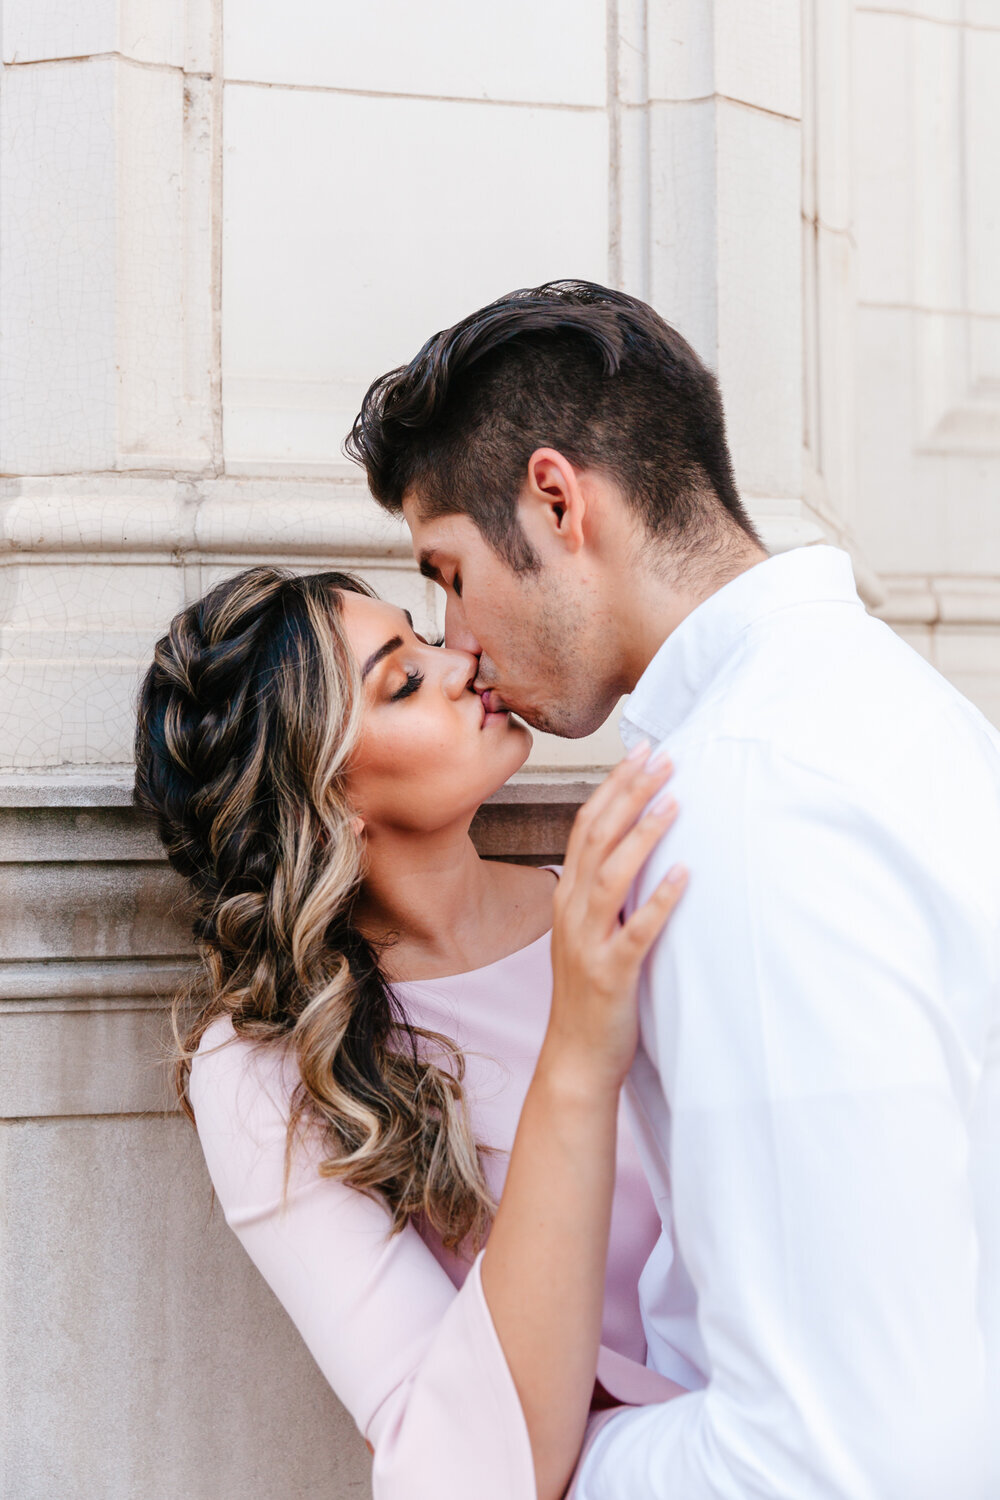 Couples+kissing+in+Chicago+engagment+photography+posing+ideas.jpg